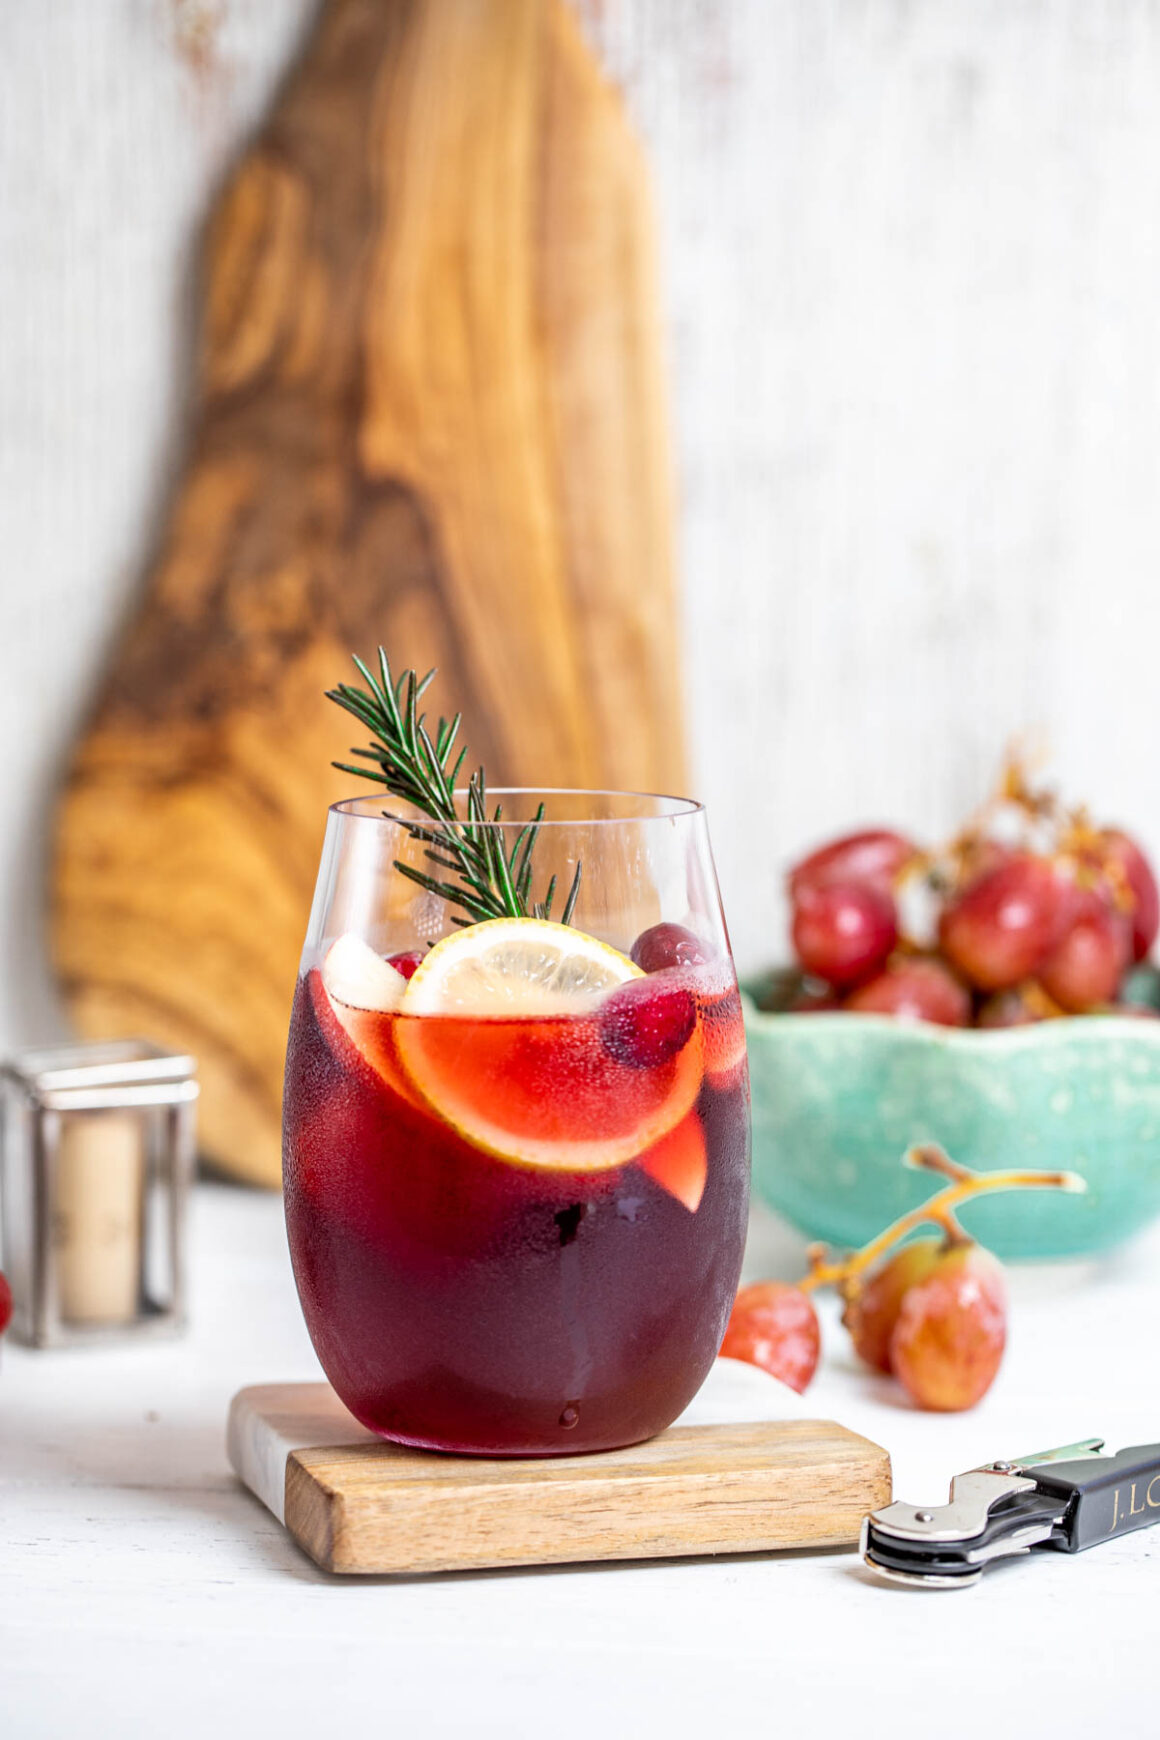 Over the years, the popularity of red sangria spread throughout Spain and eventually across the globe, becoming a beloved and refreshing cocktail.